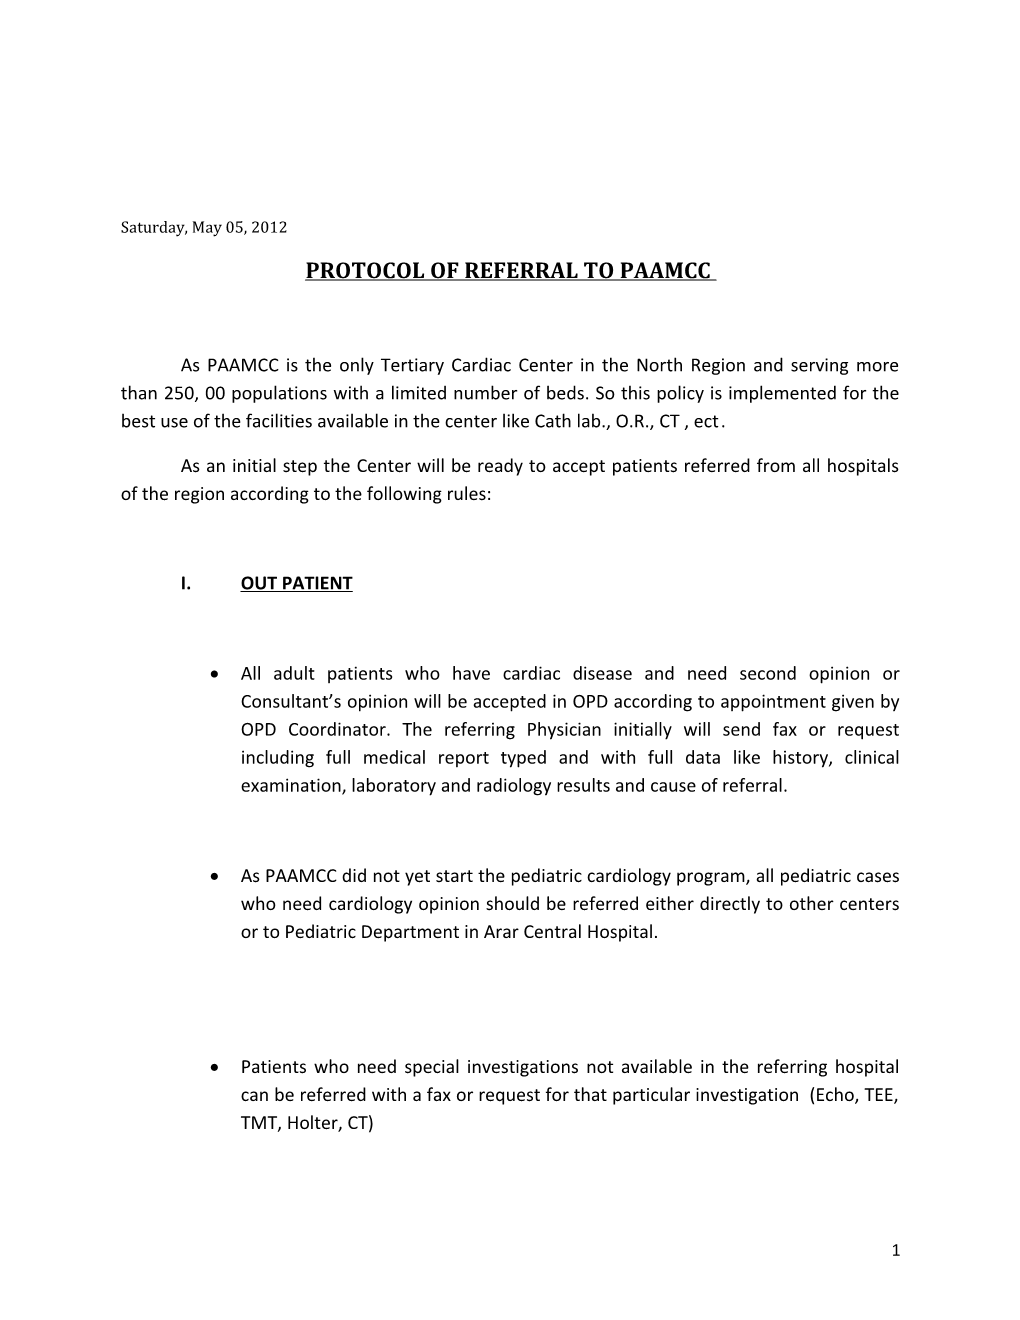 Protocol of Referral to Paamcc